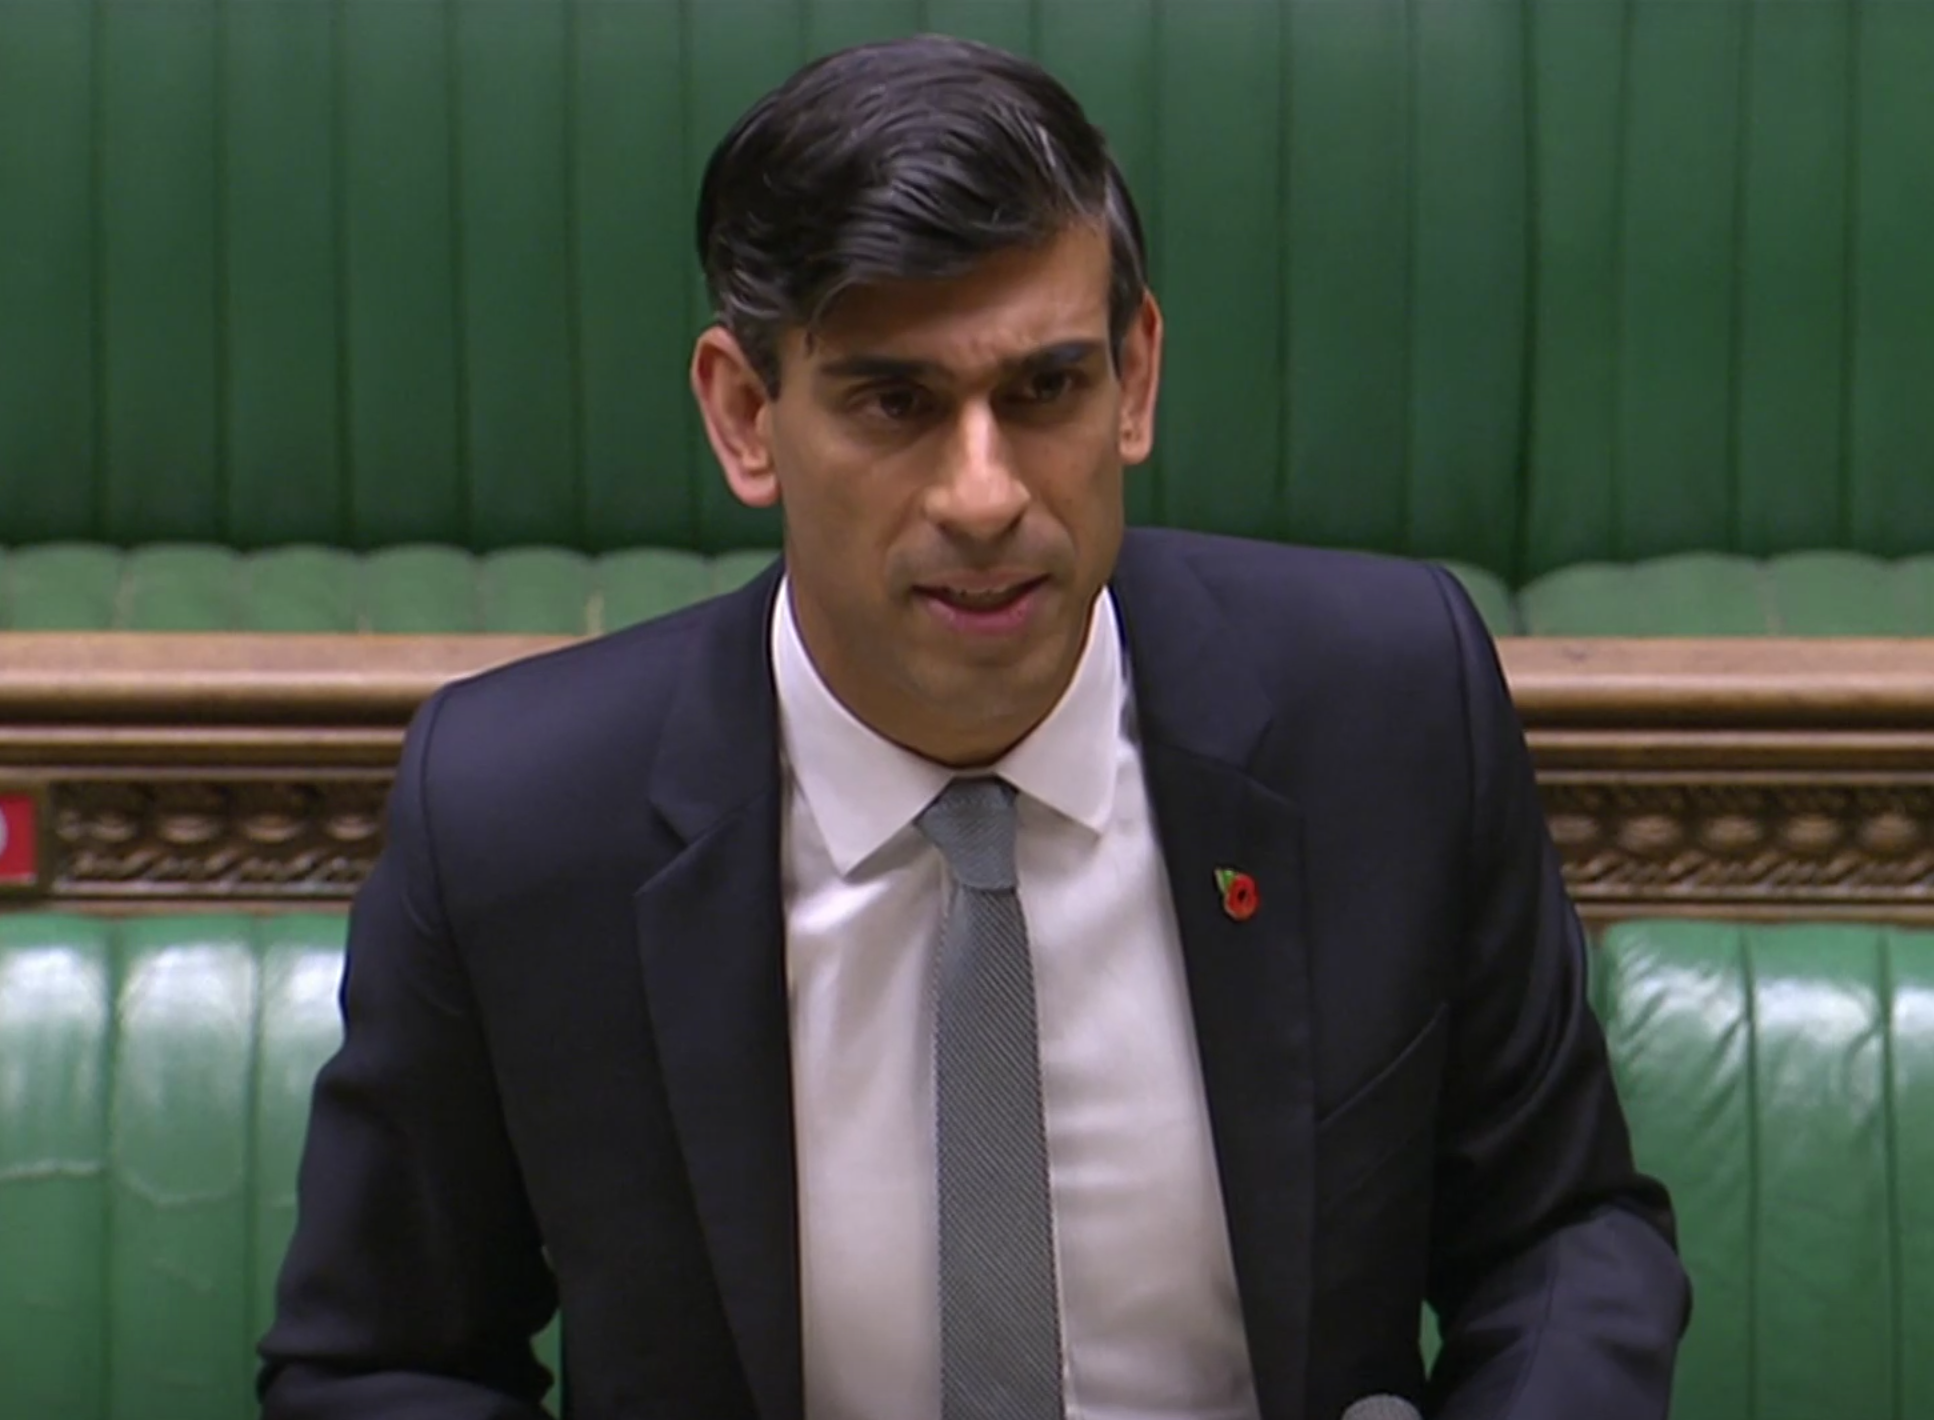 Rishi Sunak, the chancellor of the exchequer, announces yet another big change in economic policy